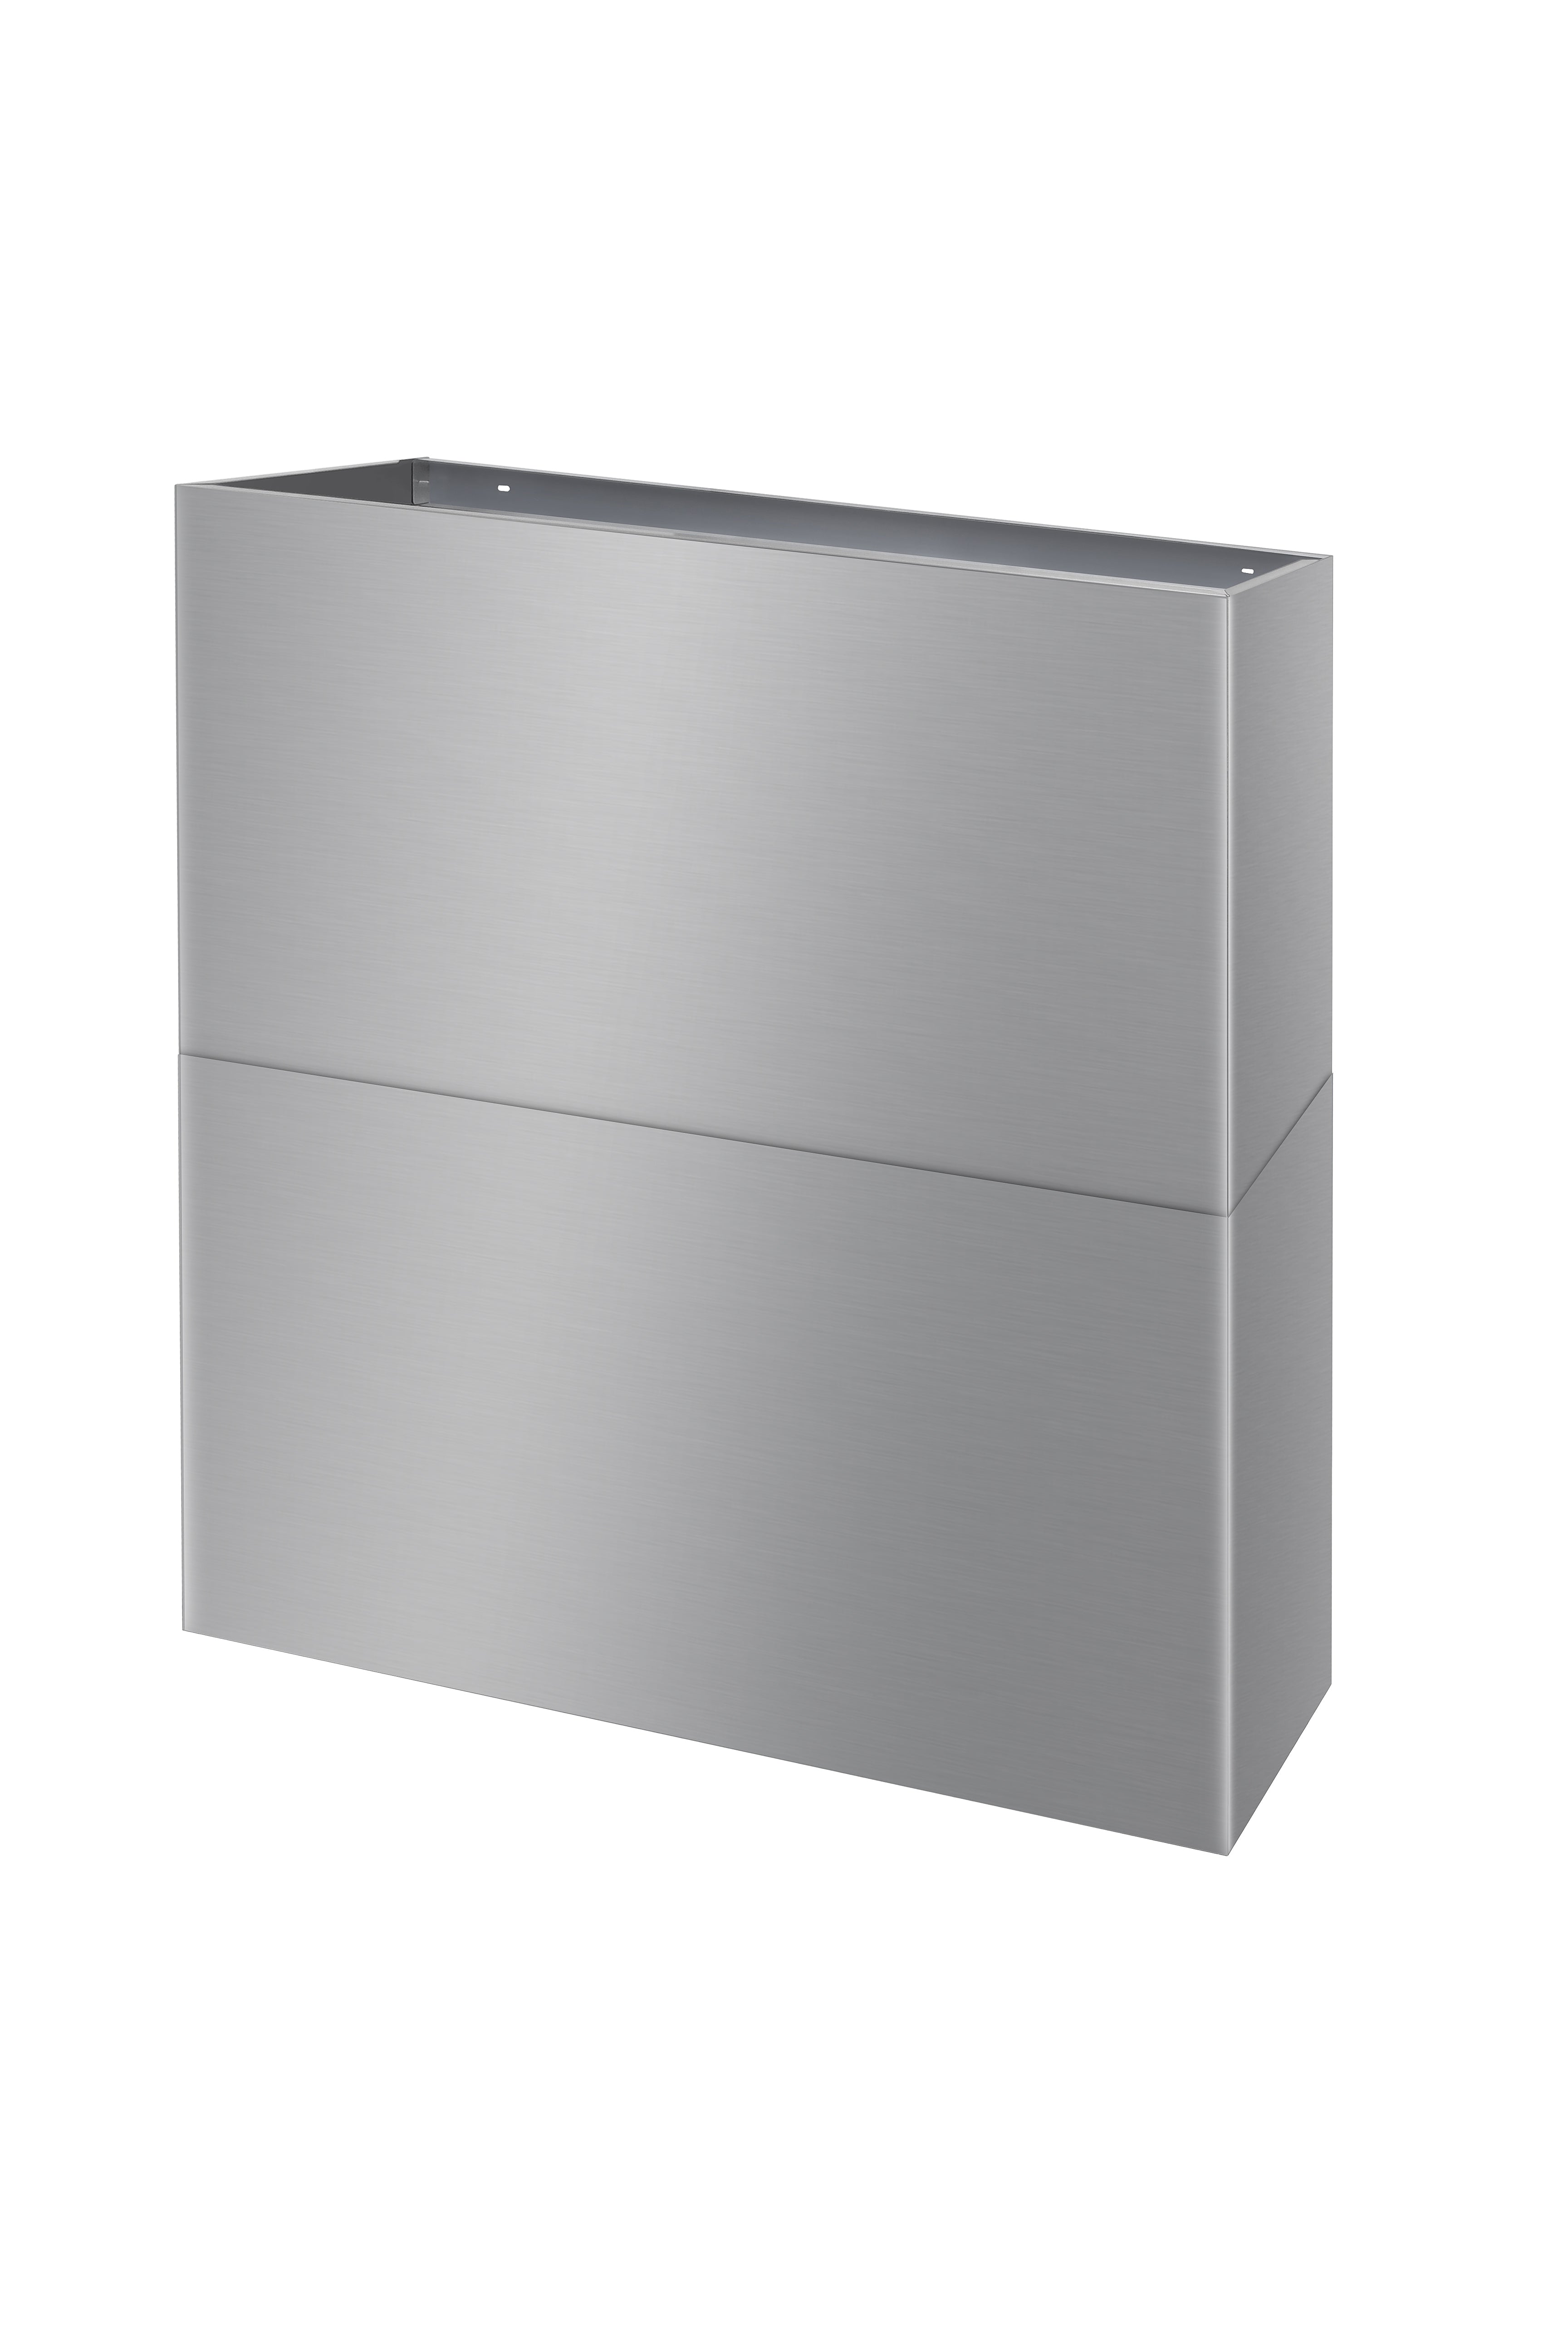 Thor Kitchen 48 Inch Duct Cover For Range Hood In Stainless Steel - Model RHDC4856